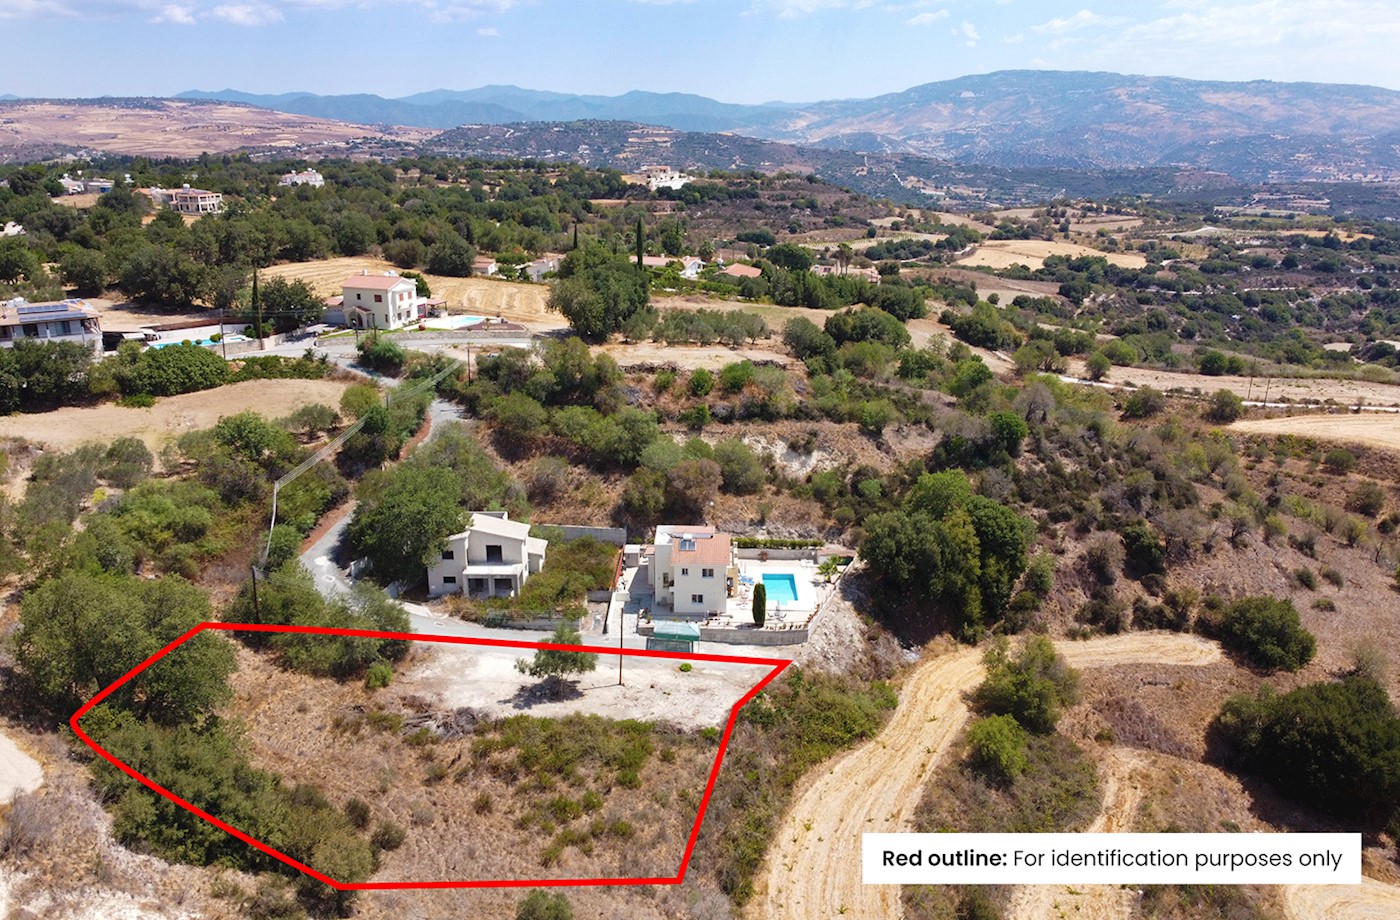 Residential field in Polemi, Paphos 1/2